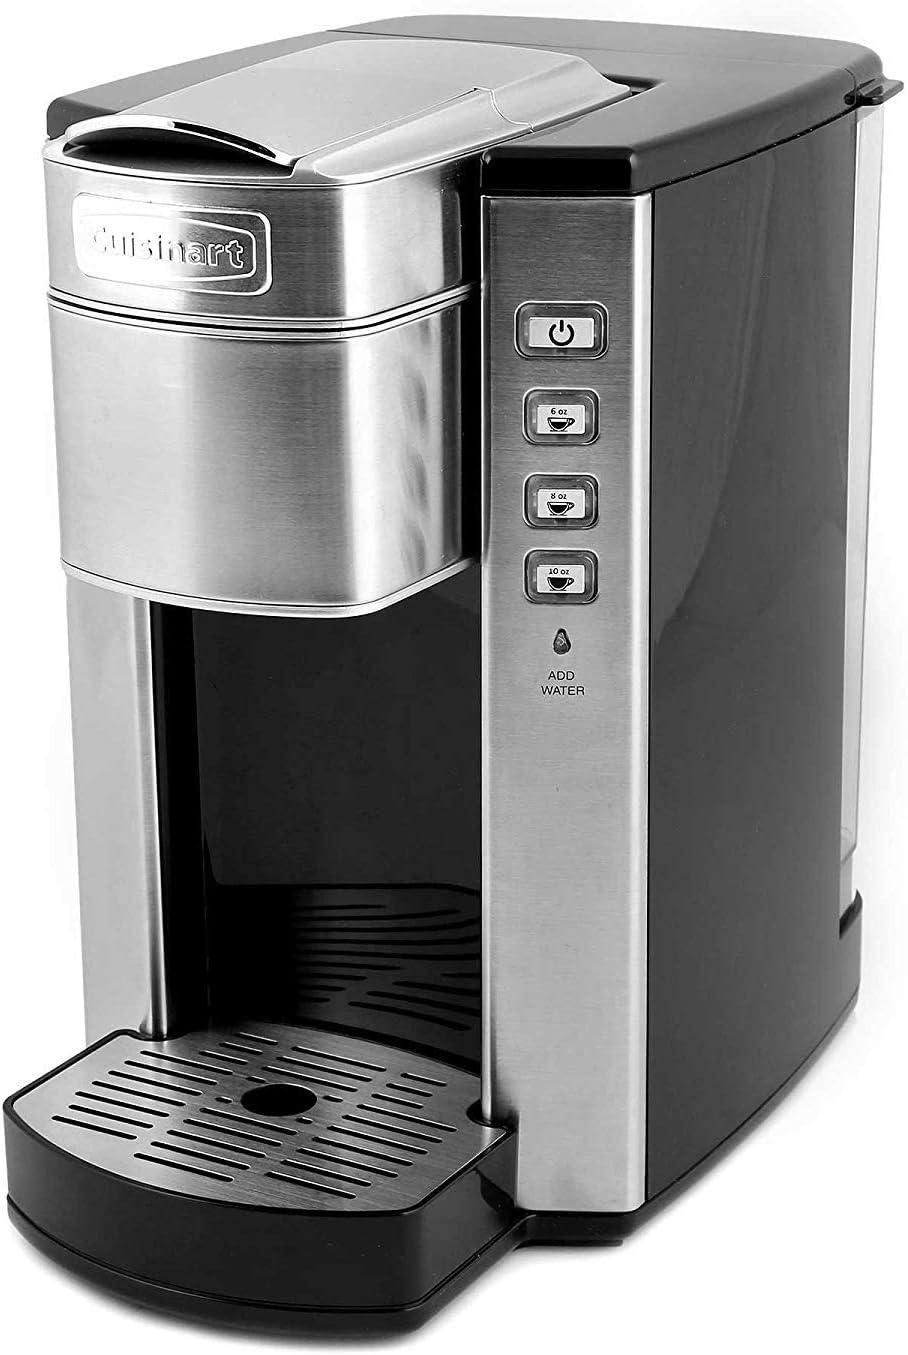 Cuisinart SS-6FR Compact Signle Serve Coffeemaker - Certified Refurbished